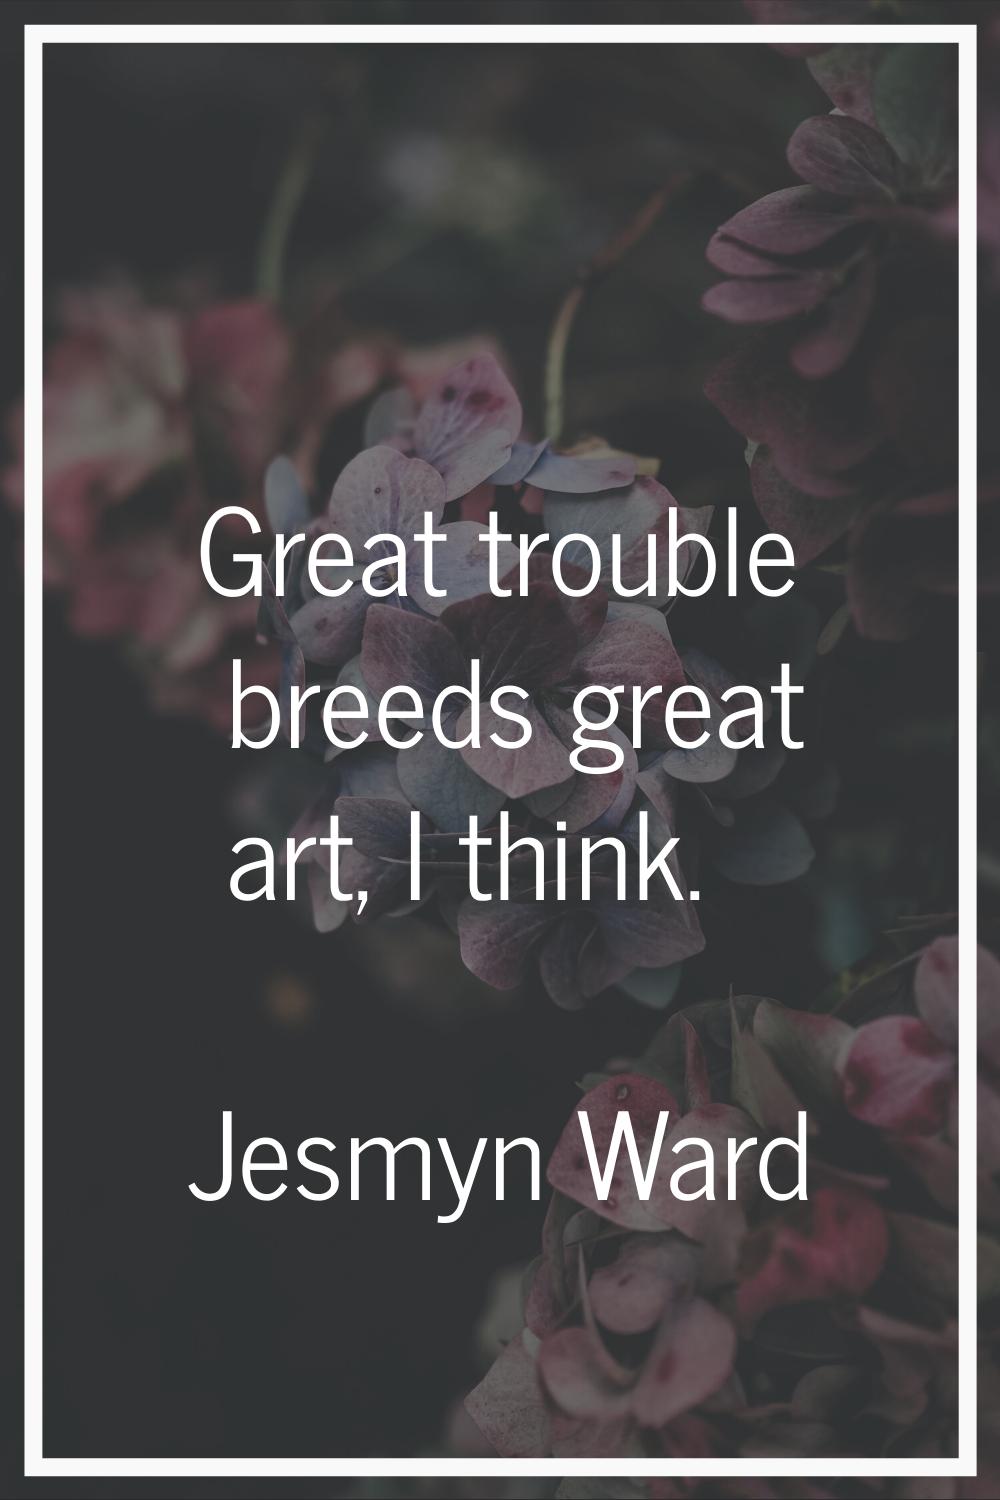 Great trouble breeds great art, I think.